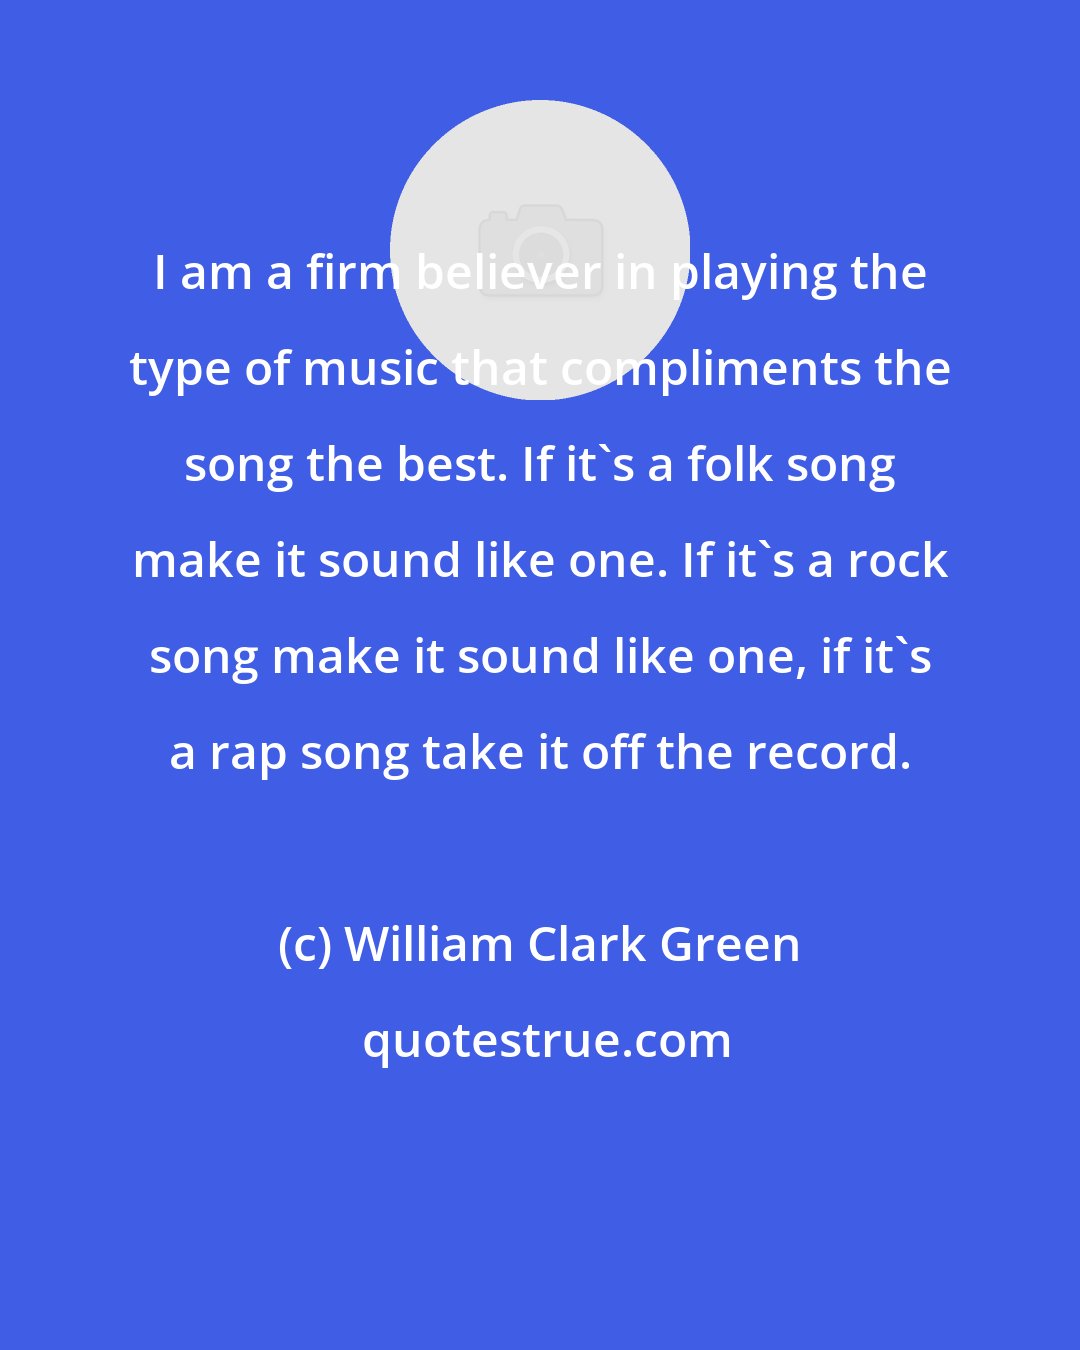 William Clark Green: I am a firm believer in playing the type of music that compliments the song the best. If it's a folk song make it sound like one. If it's a rock song make it sound like one, if it's a rap song take it off the record.